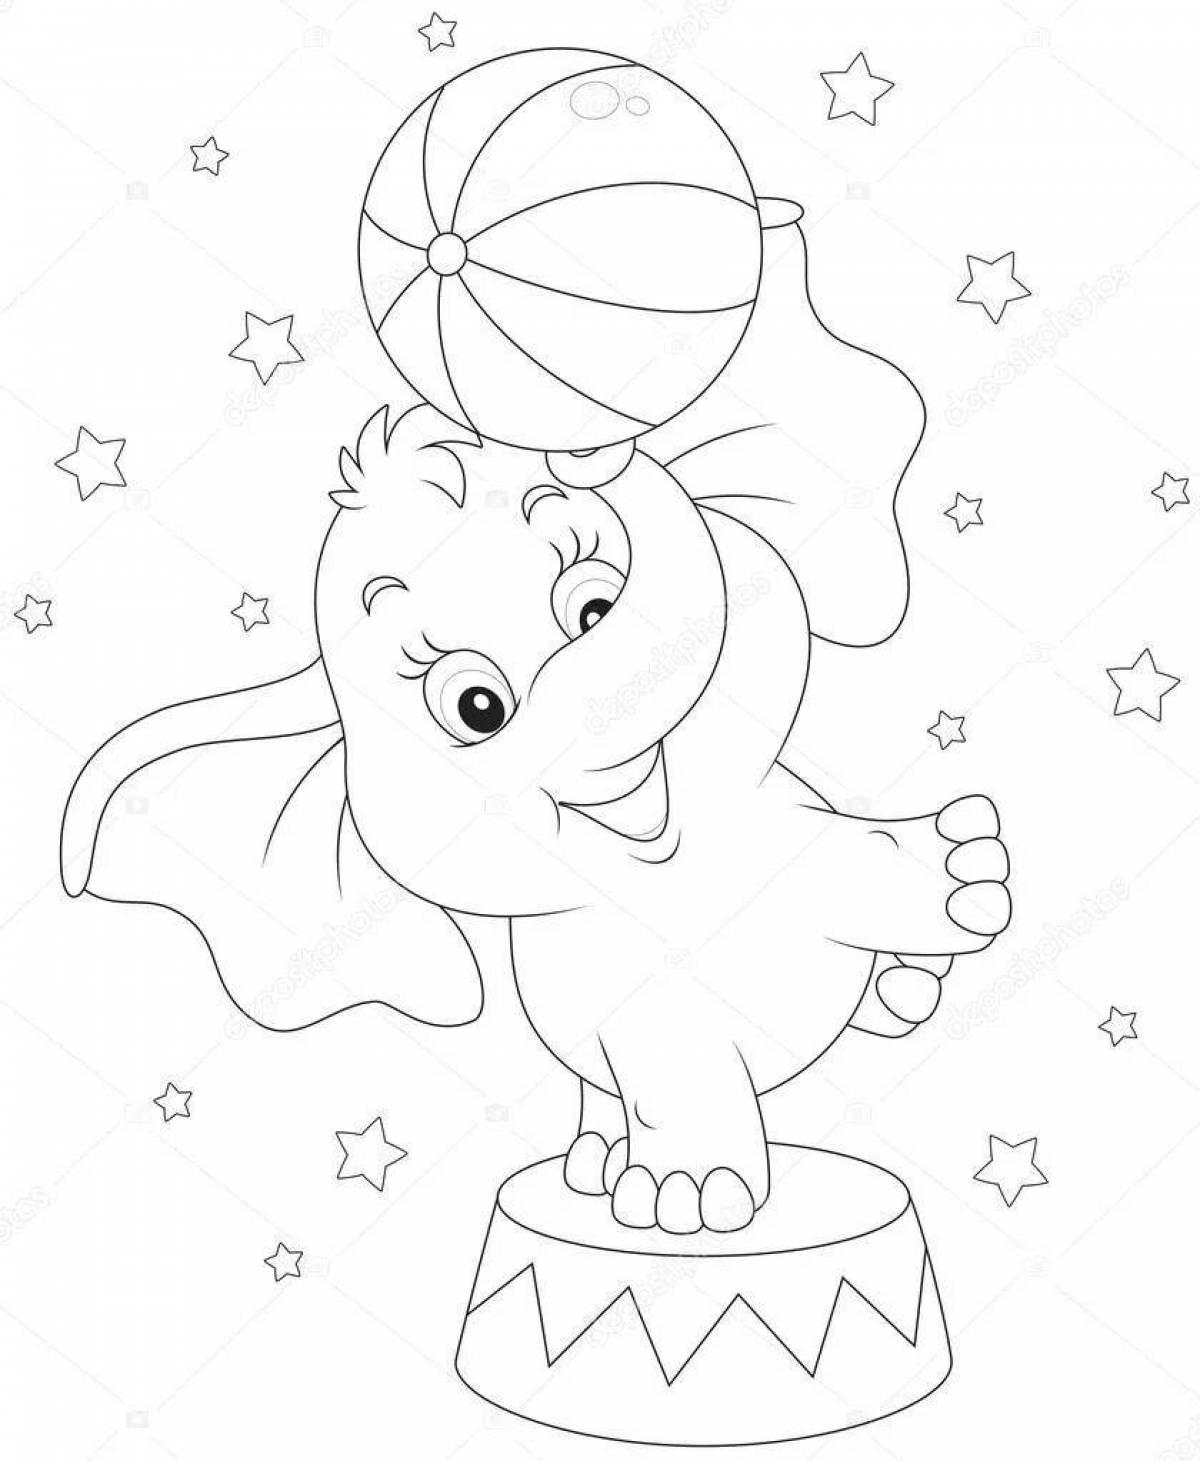 Coloring book outstanding circus elephant